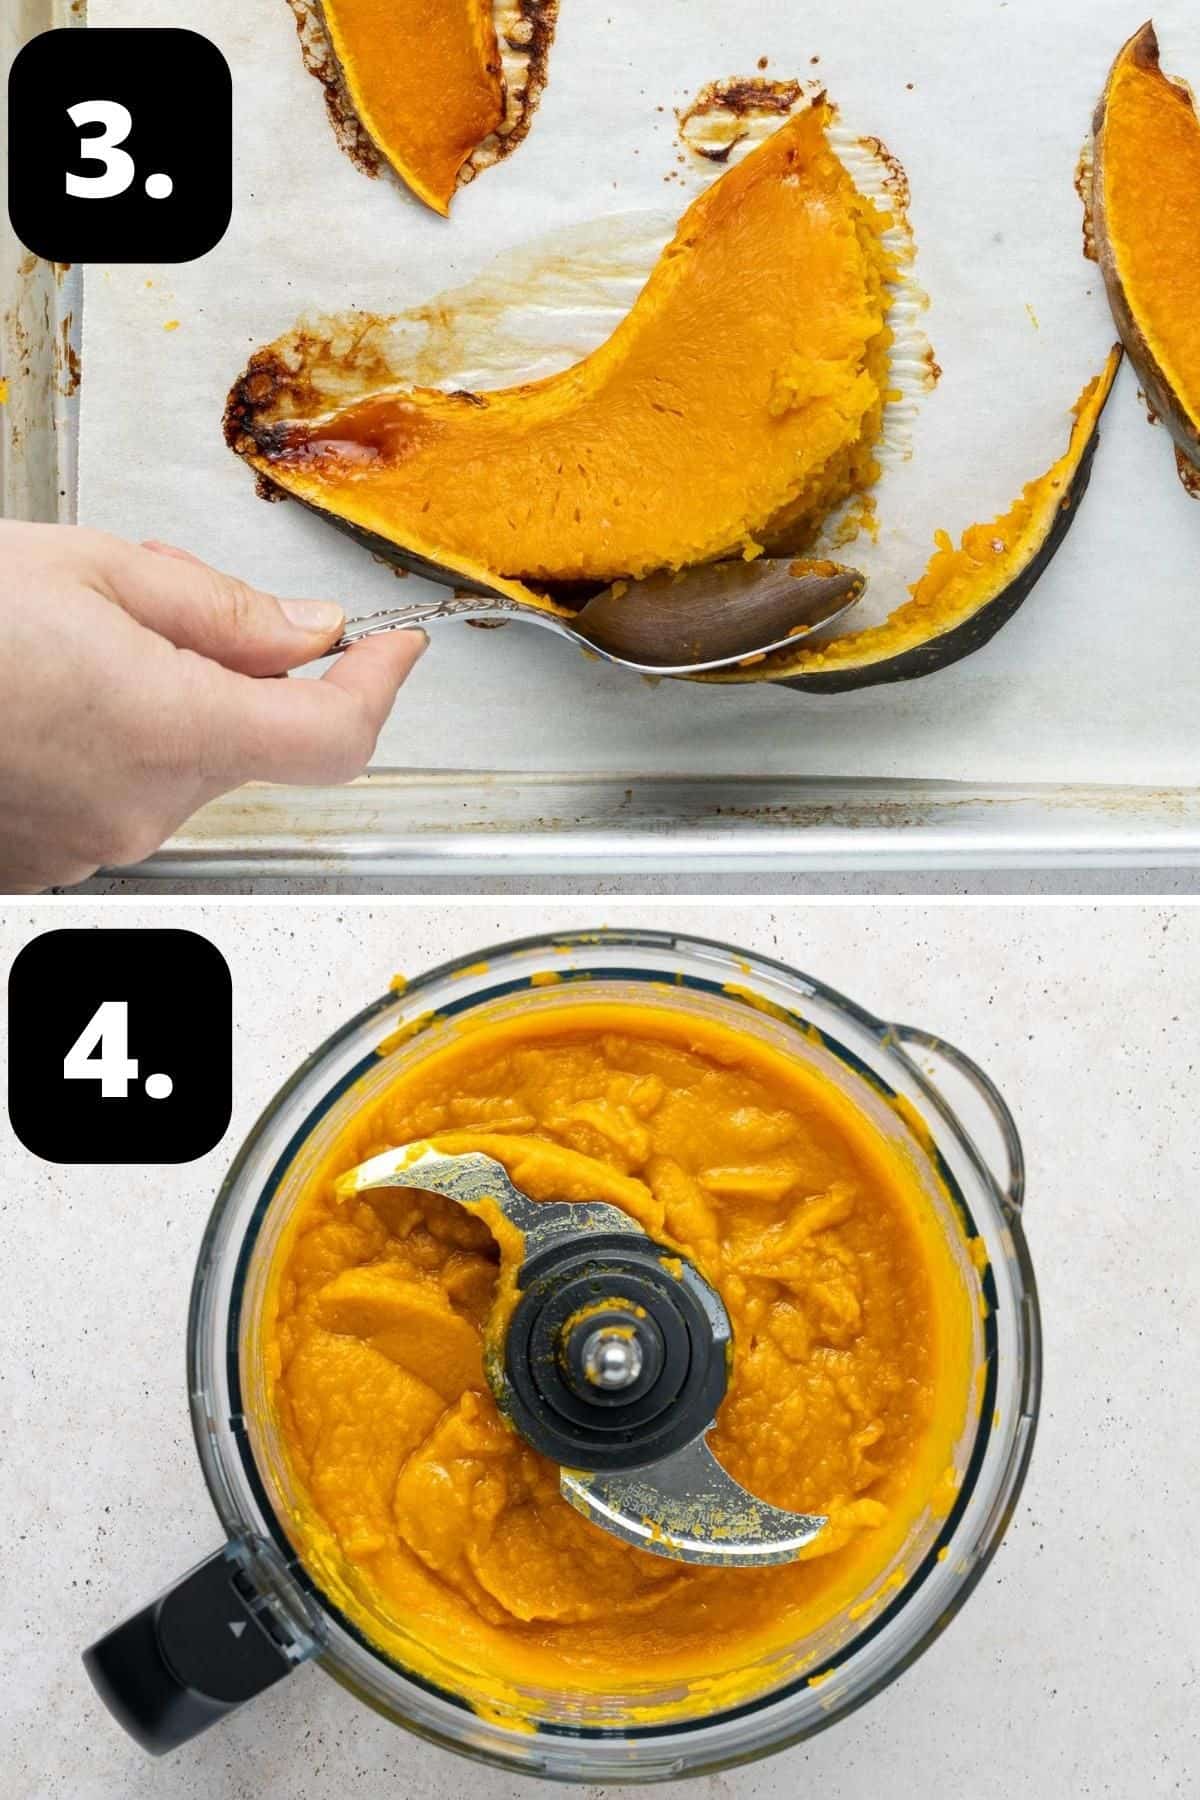 Steps 3-4 of preparing this recipe - removing the skin from the cooked pumpkin and pureeing the mixture in a food processor.